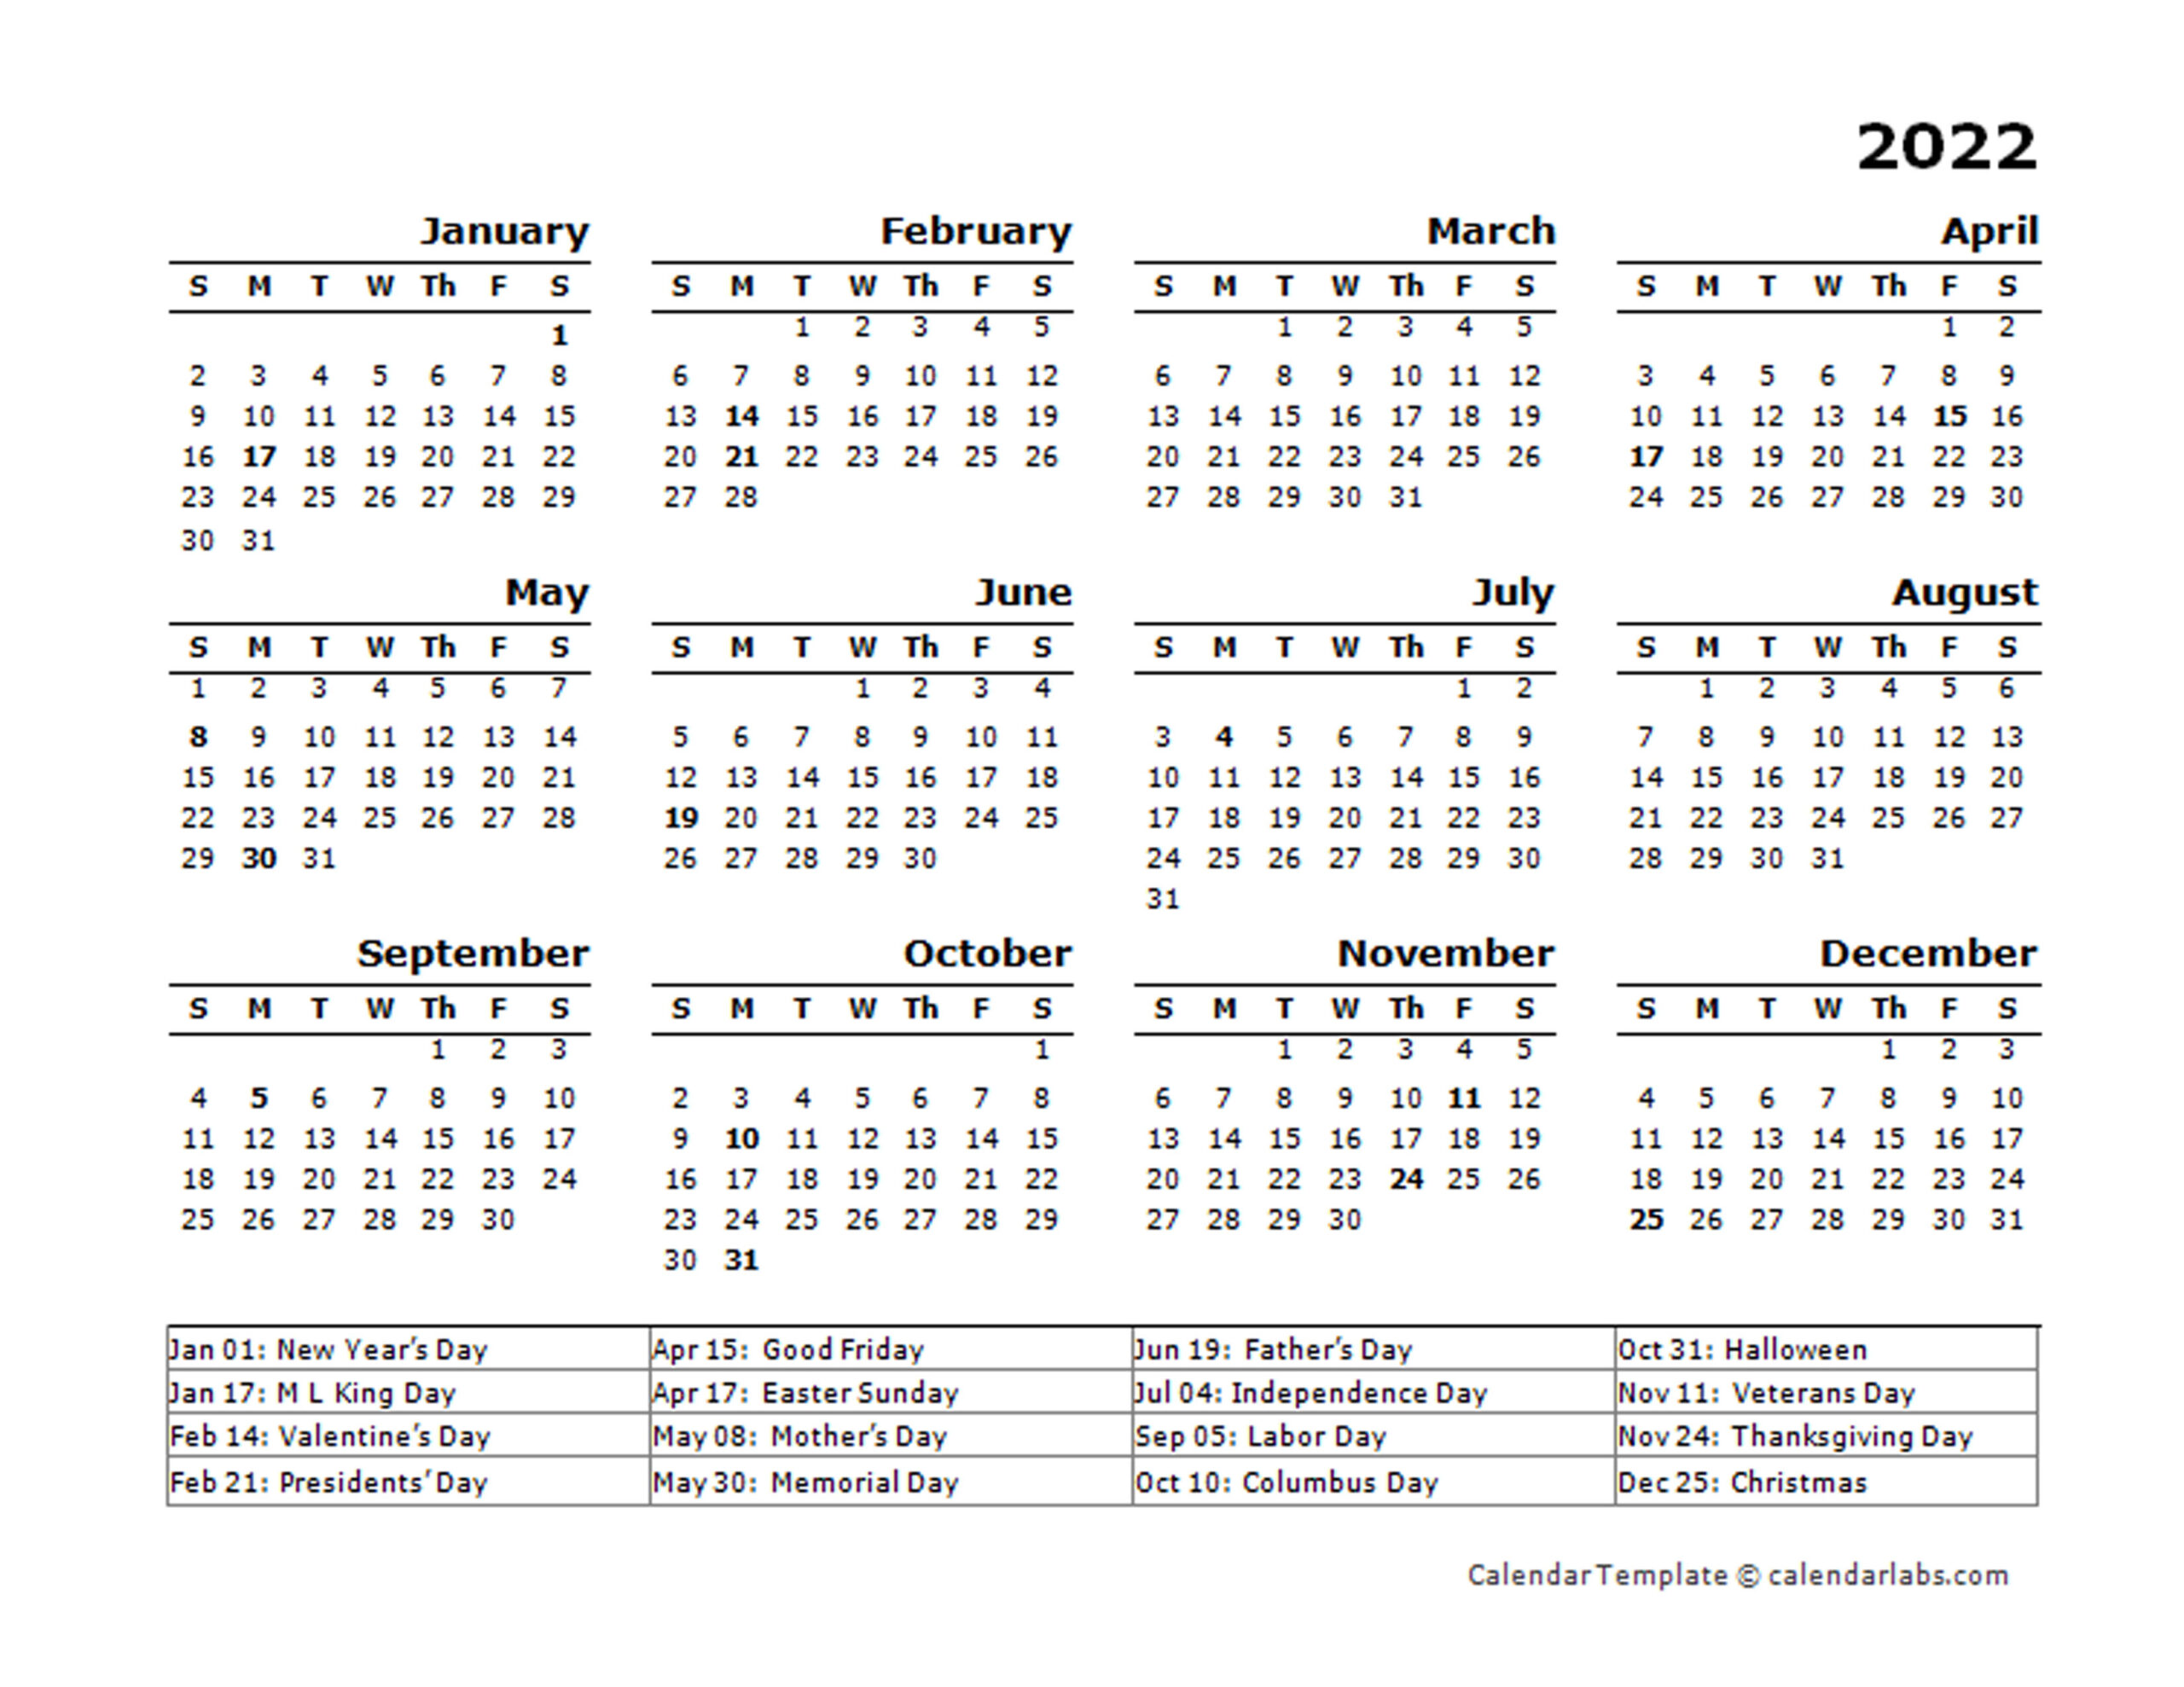 2022 Yearly Calendar Template With Us Holidays - Free